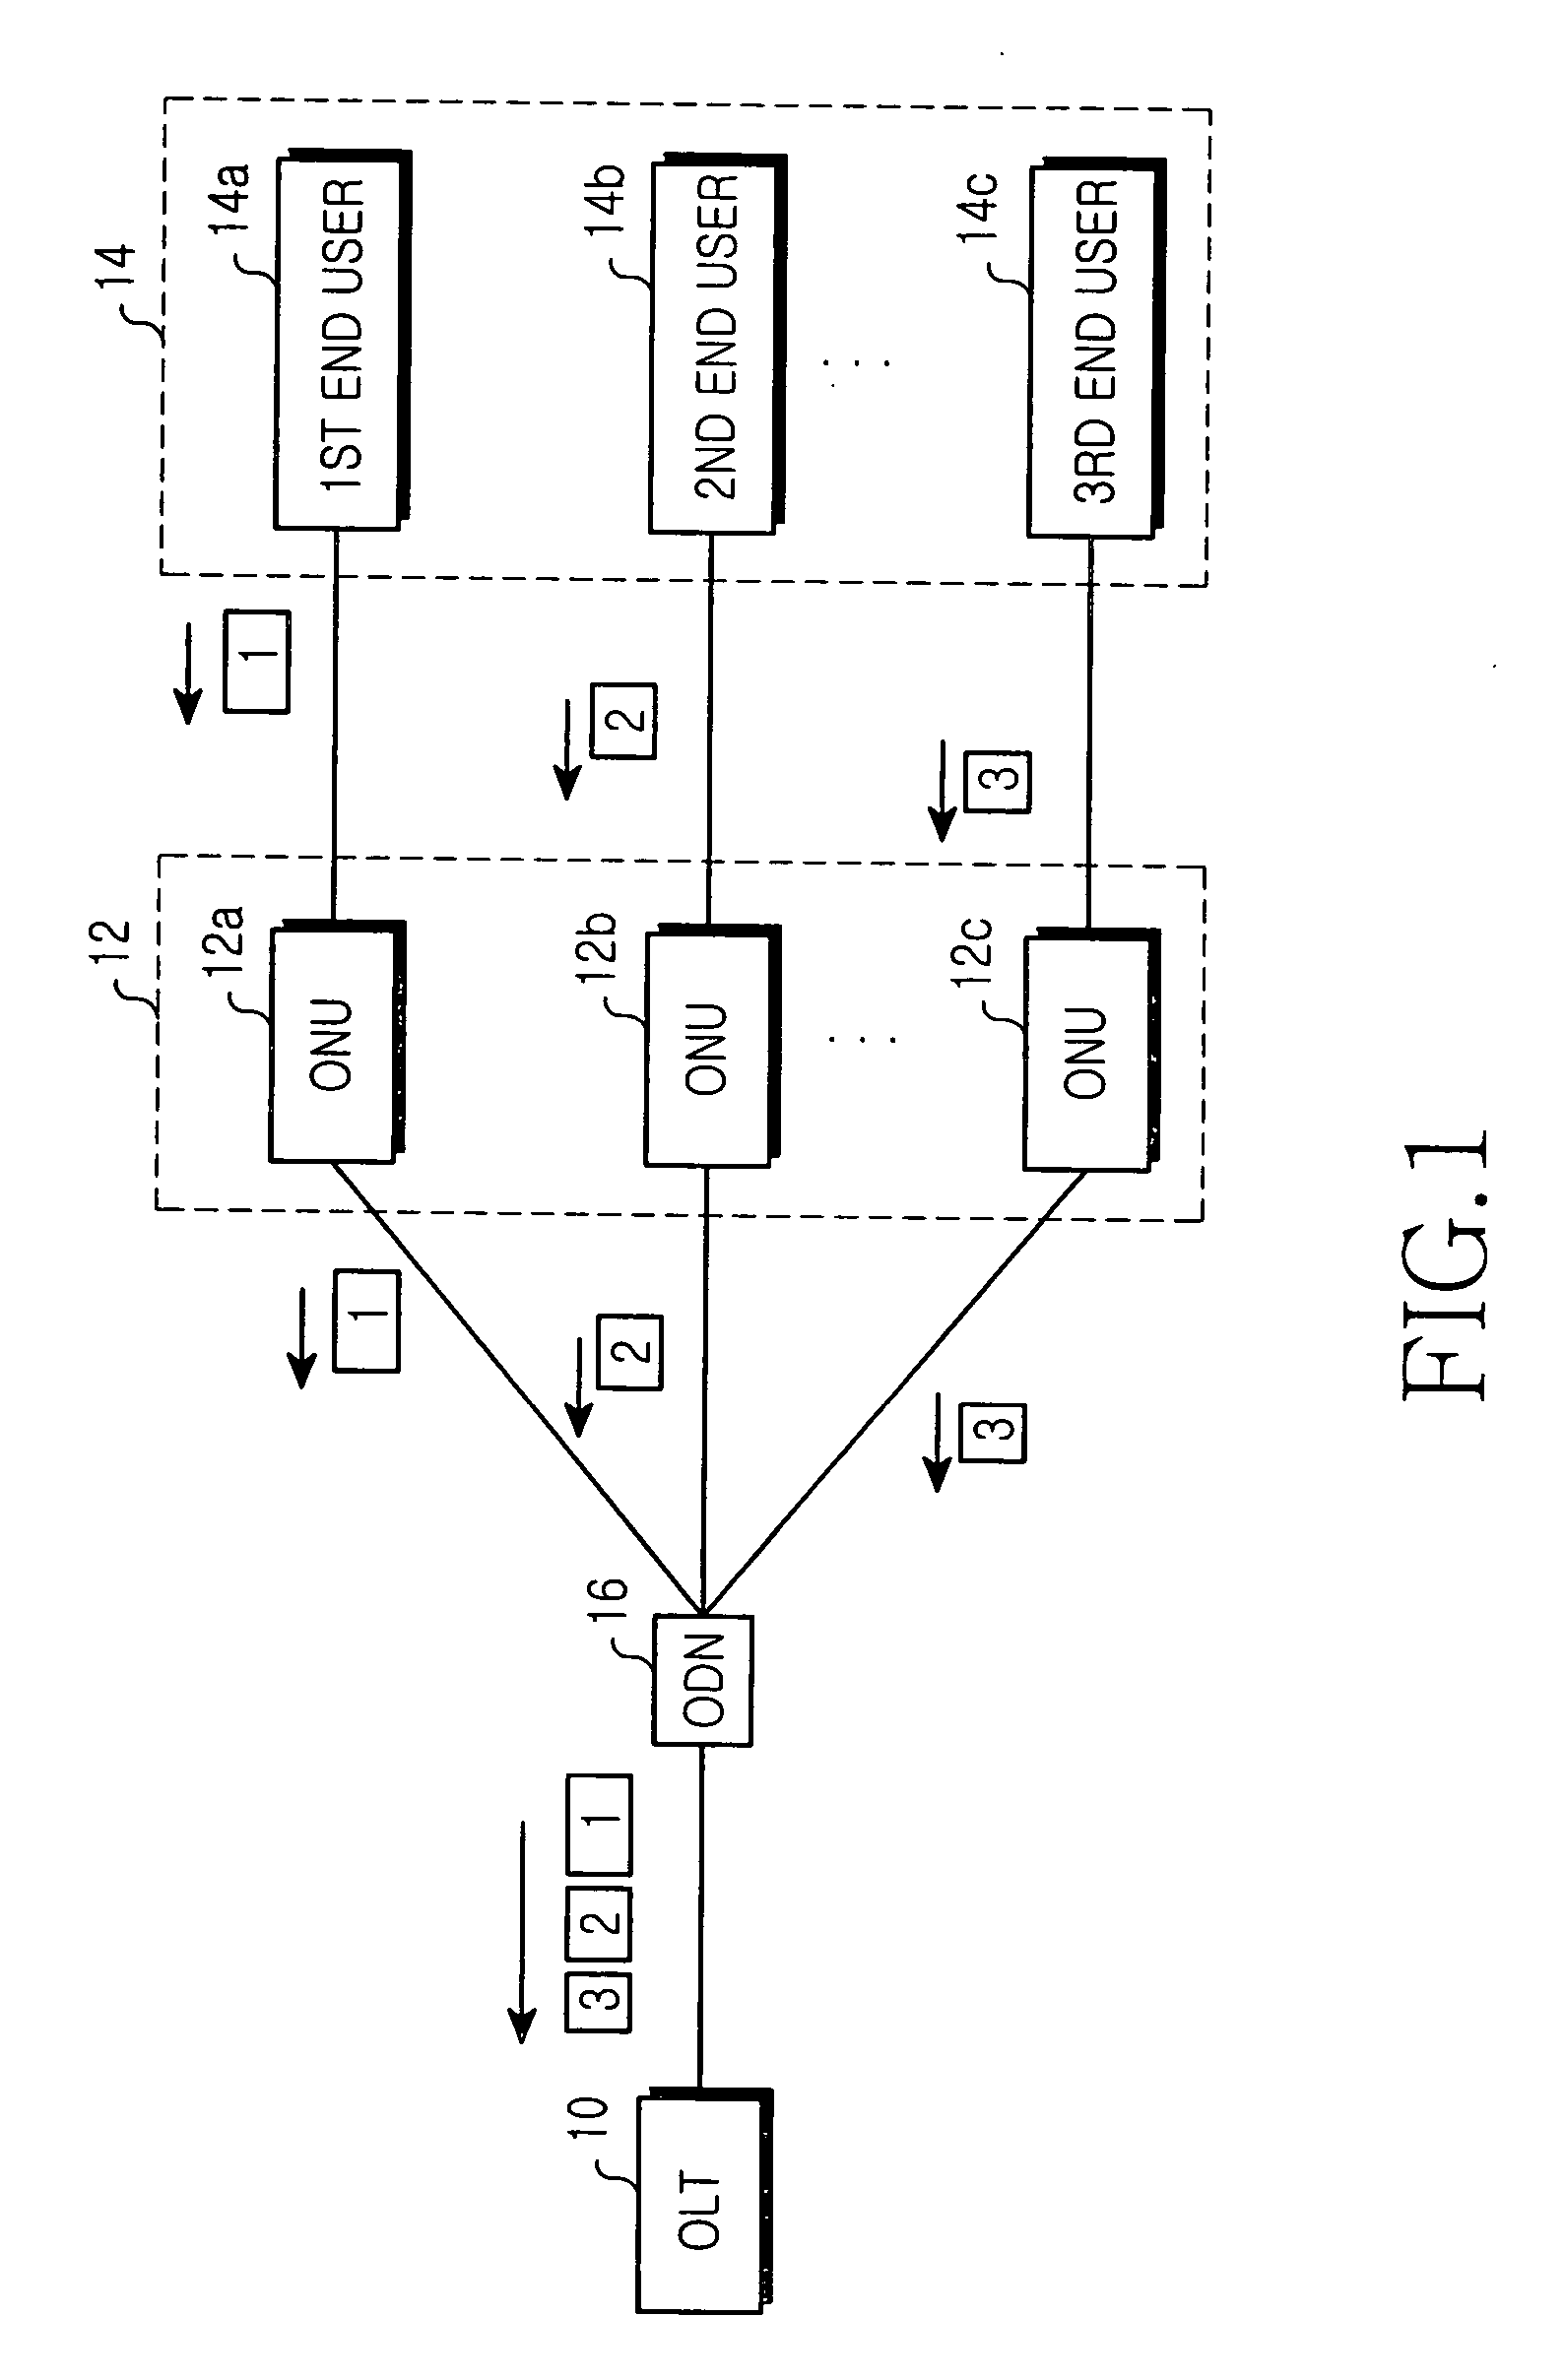 Method and apparatus for controlling downstream traffic in ethernet passive optical network